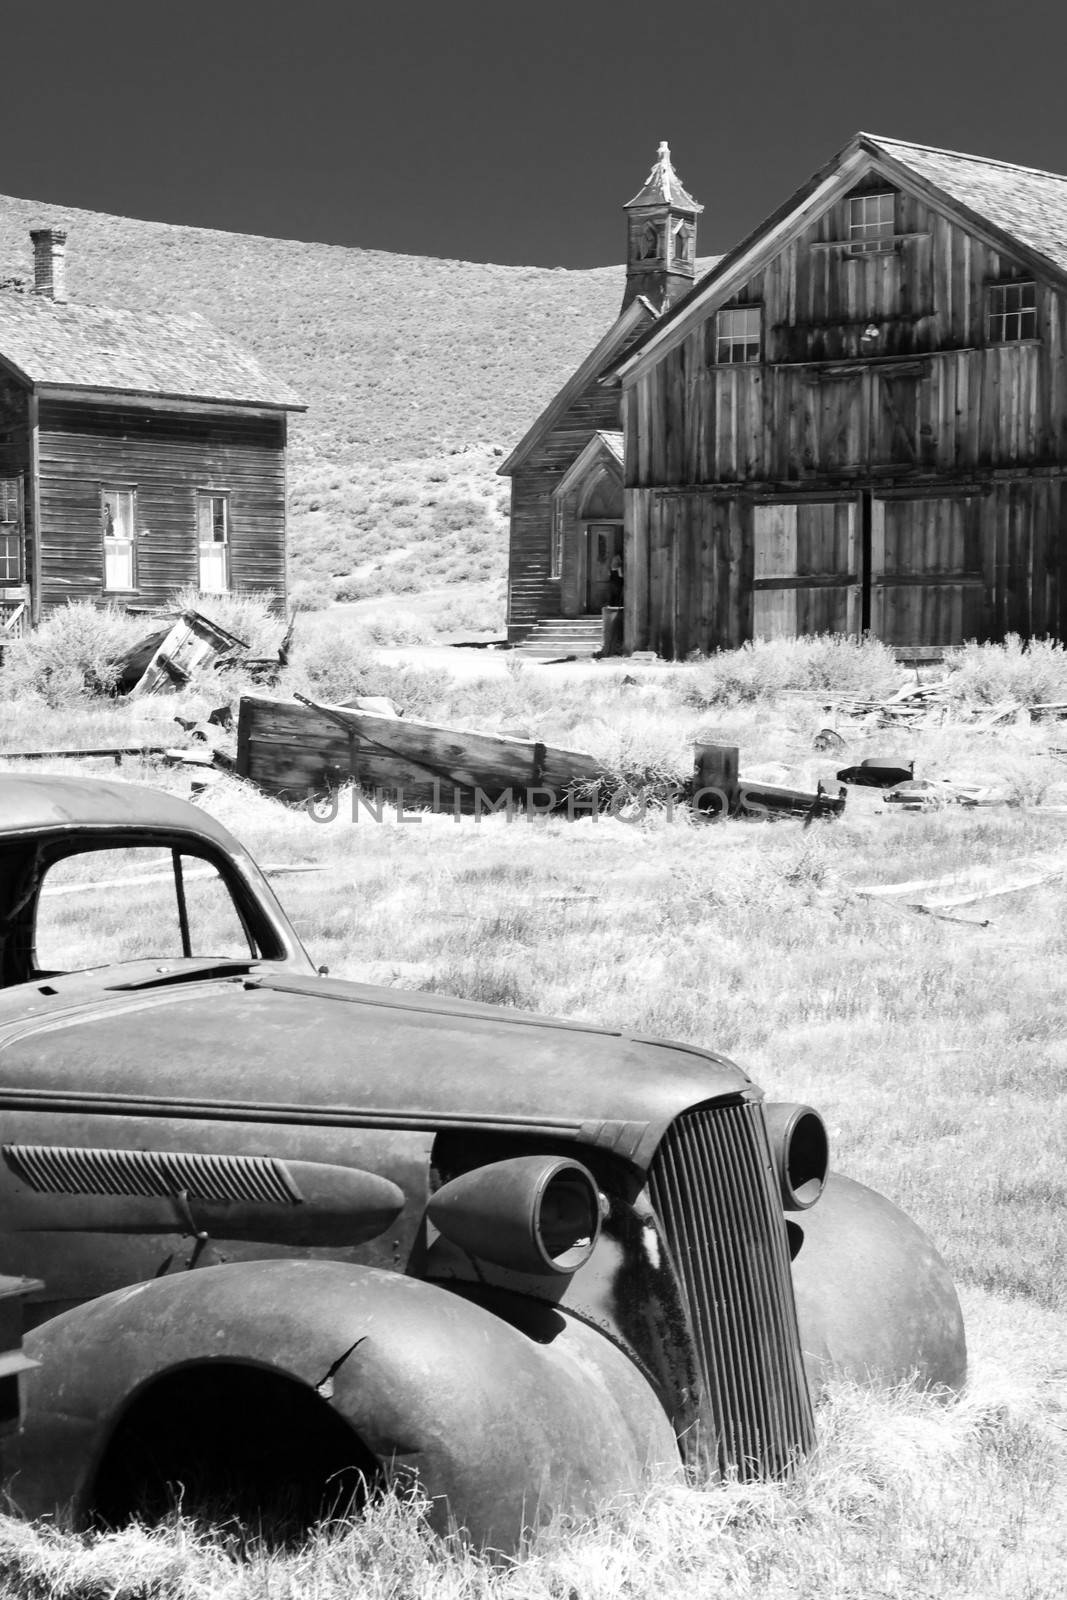 Abandoned car and historic wooden buildings in Bodie State Historic Park a Californian gold-mining ghost town.